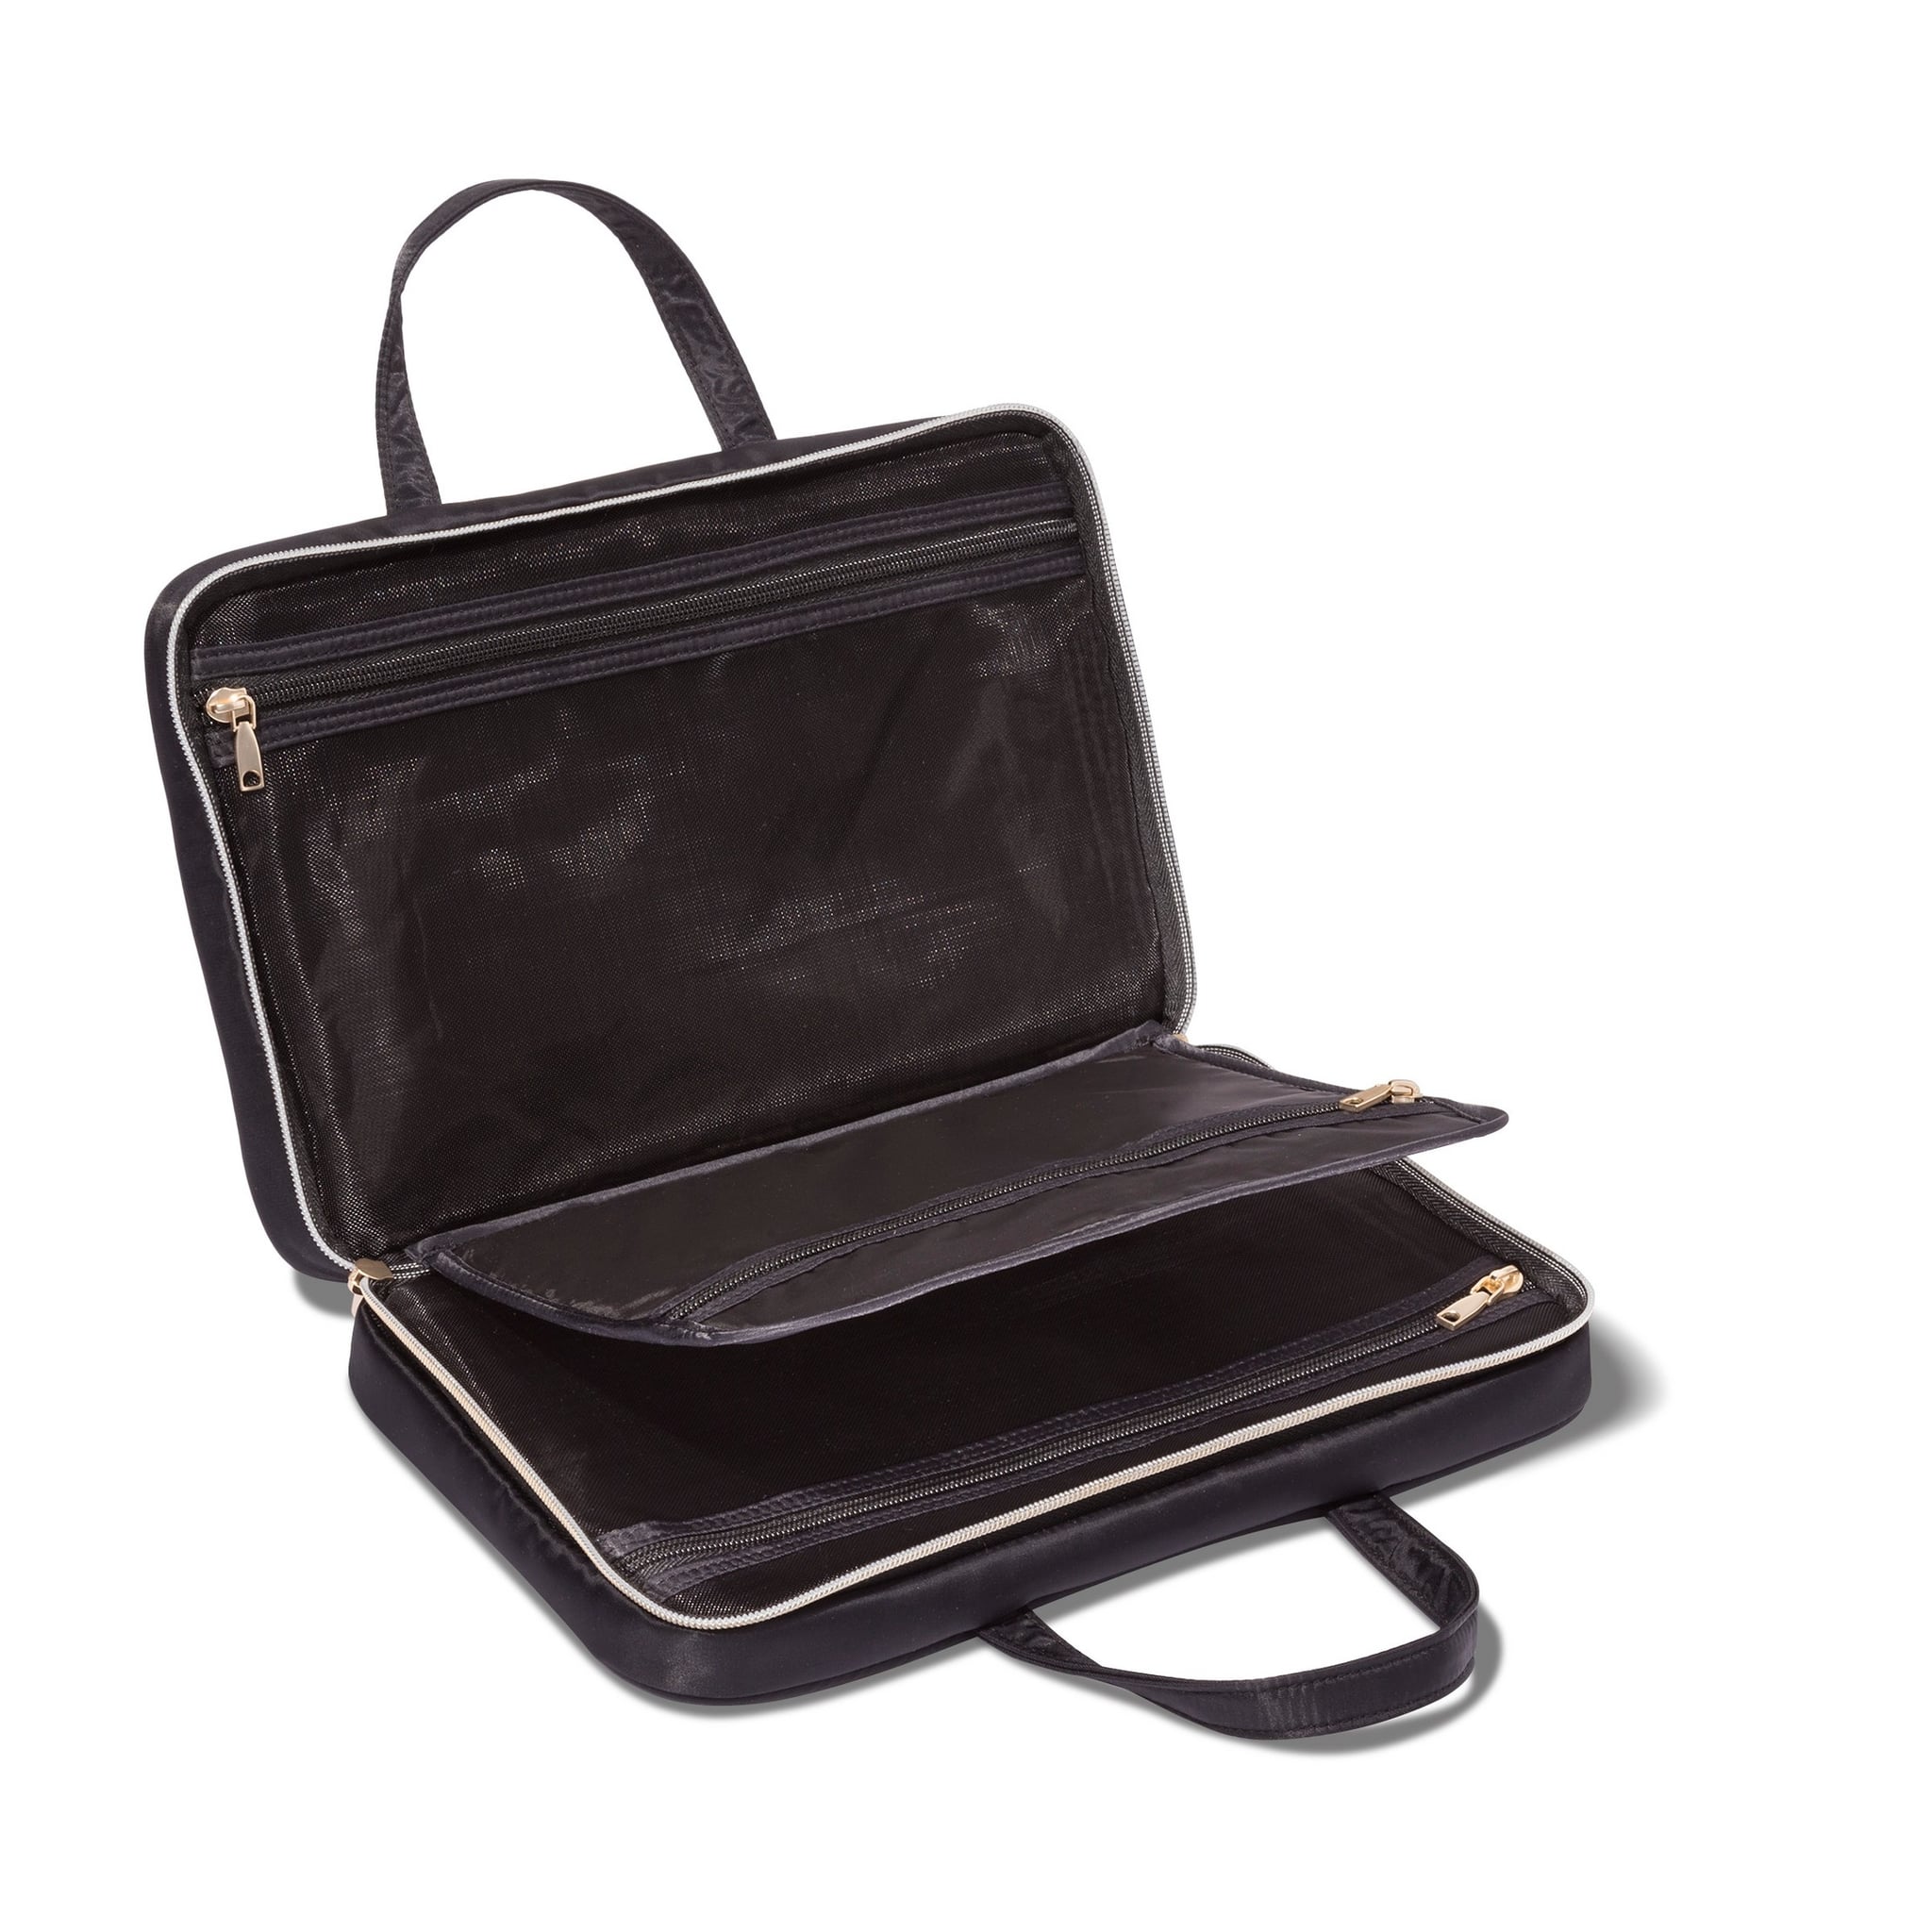 <p><a href="https://www.target.com/p/sonia-kashuk-8482-weekender-makeup-bag-black/-/A-52702304#lnk=sametab">BUY NOW</a></p><p>$20</p><p><a href="https://www.target.com/p/sonia-kashuk-8482-weekender-makeup-bag-black/-/A-52702304#lnk=sametab" class="ga-track"><strong>Sonia Kashuk Weekender Makeup Bag</strong></a> ($20)</p> <p>If you're someone who only likes to take the essentials with them while traveling, the Sonia Kashuk Weekender Makeup Bag is a sleek and slim pick. This makeup bag features two zipped compartments and a center organizer with a zipper pocket allowing you to keep everything organized. Whether you're going on a weekend getaway, a friend's wedding, or just getting some R&R on a two-week trip, this Weekender Makeup Bag can store everything you need without fail.</p>